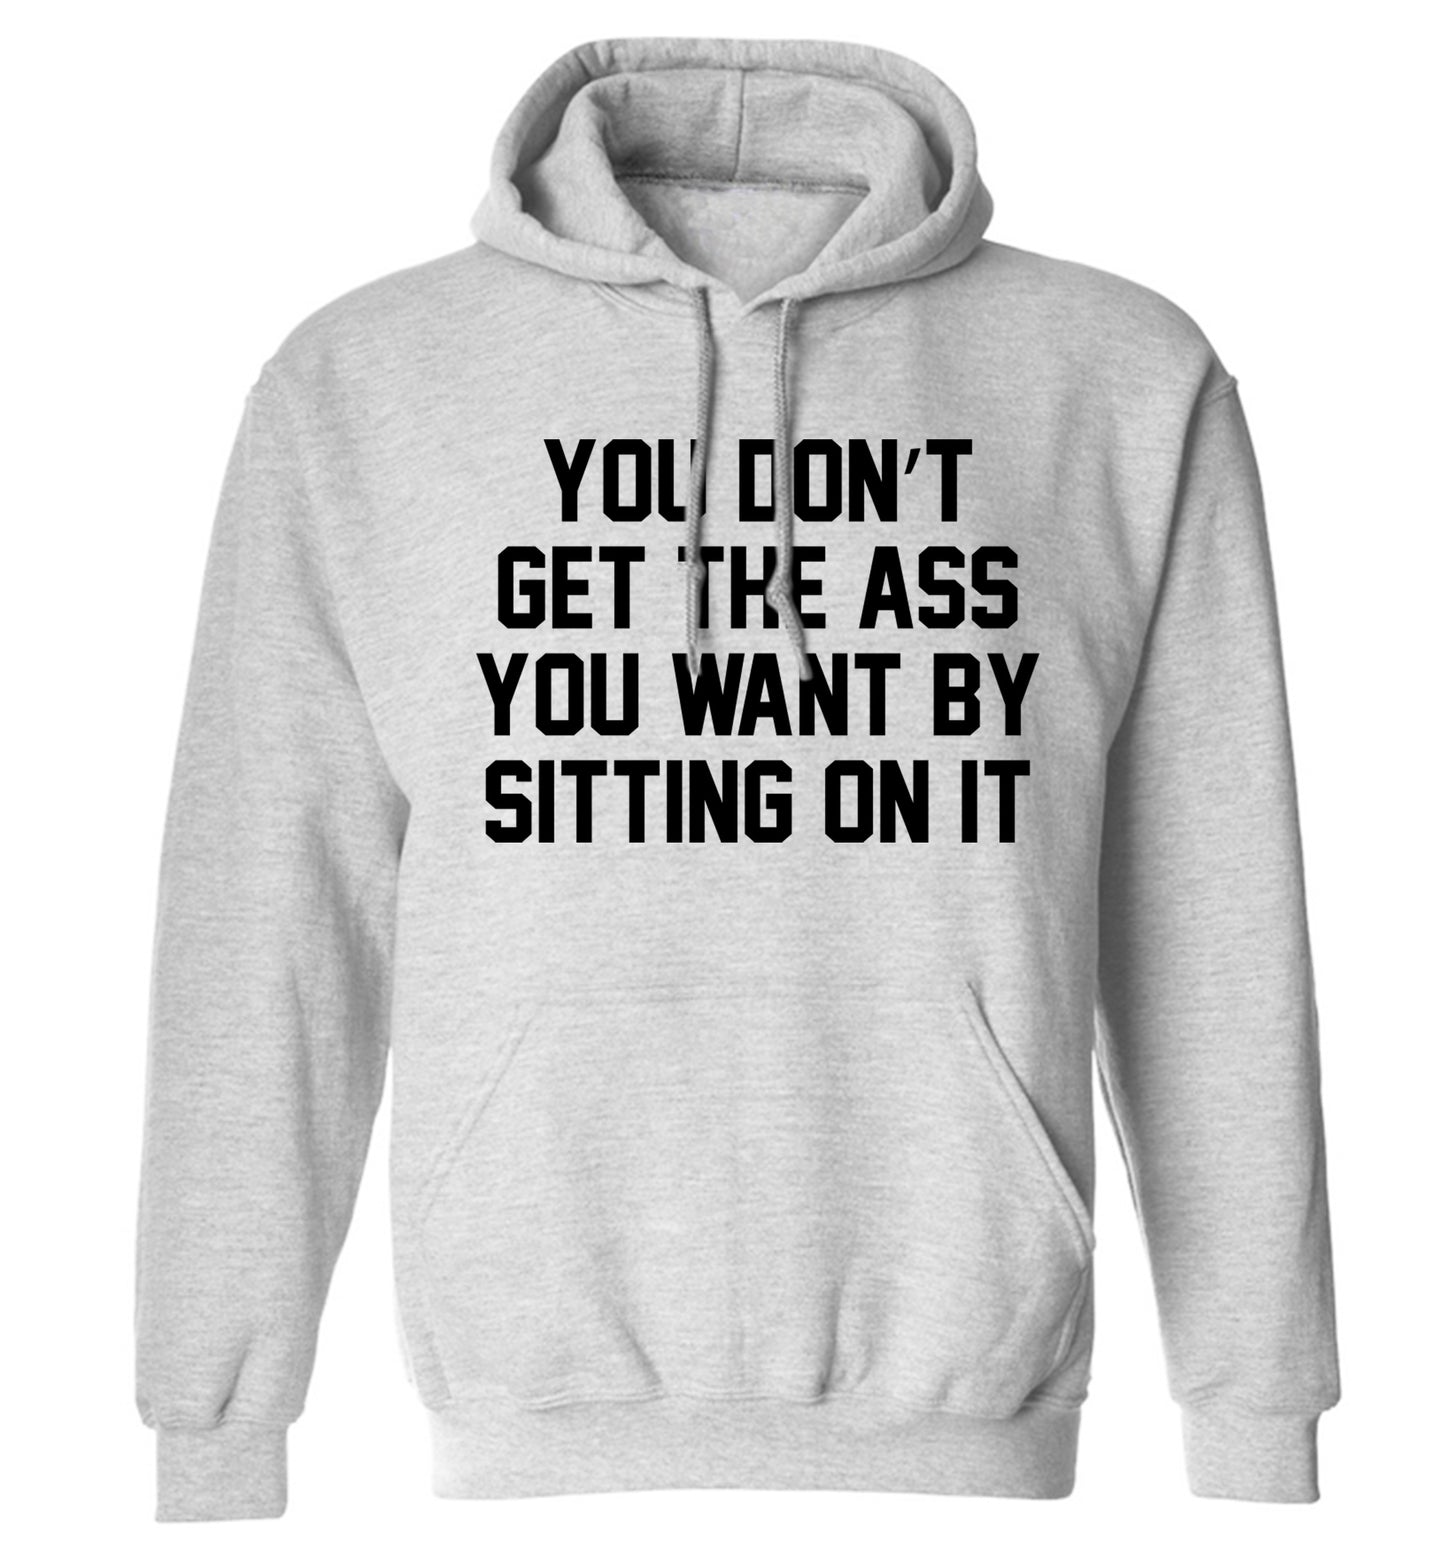 You don't get the ass you want by sitting on it adults unisex grey hoodie 2XL